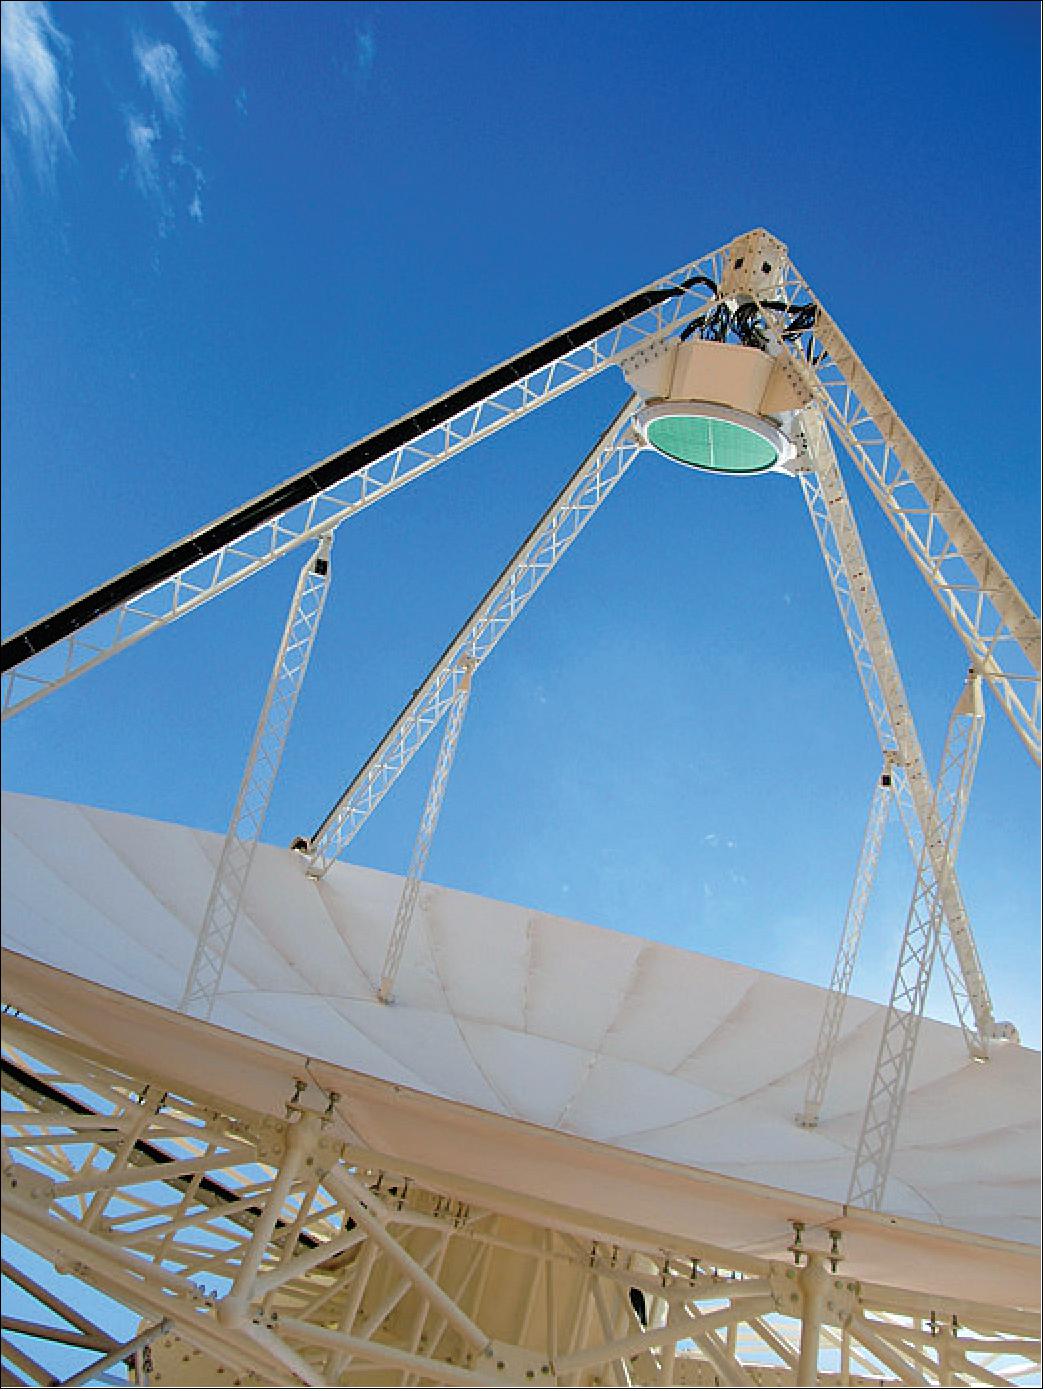 Figure 33: A phased array feed (PAF) receiver installed on an ASKAP antenna at the Murchison Radioastronomy Observatory (image credit: CSIRO, Barry Turner)